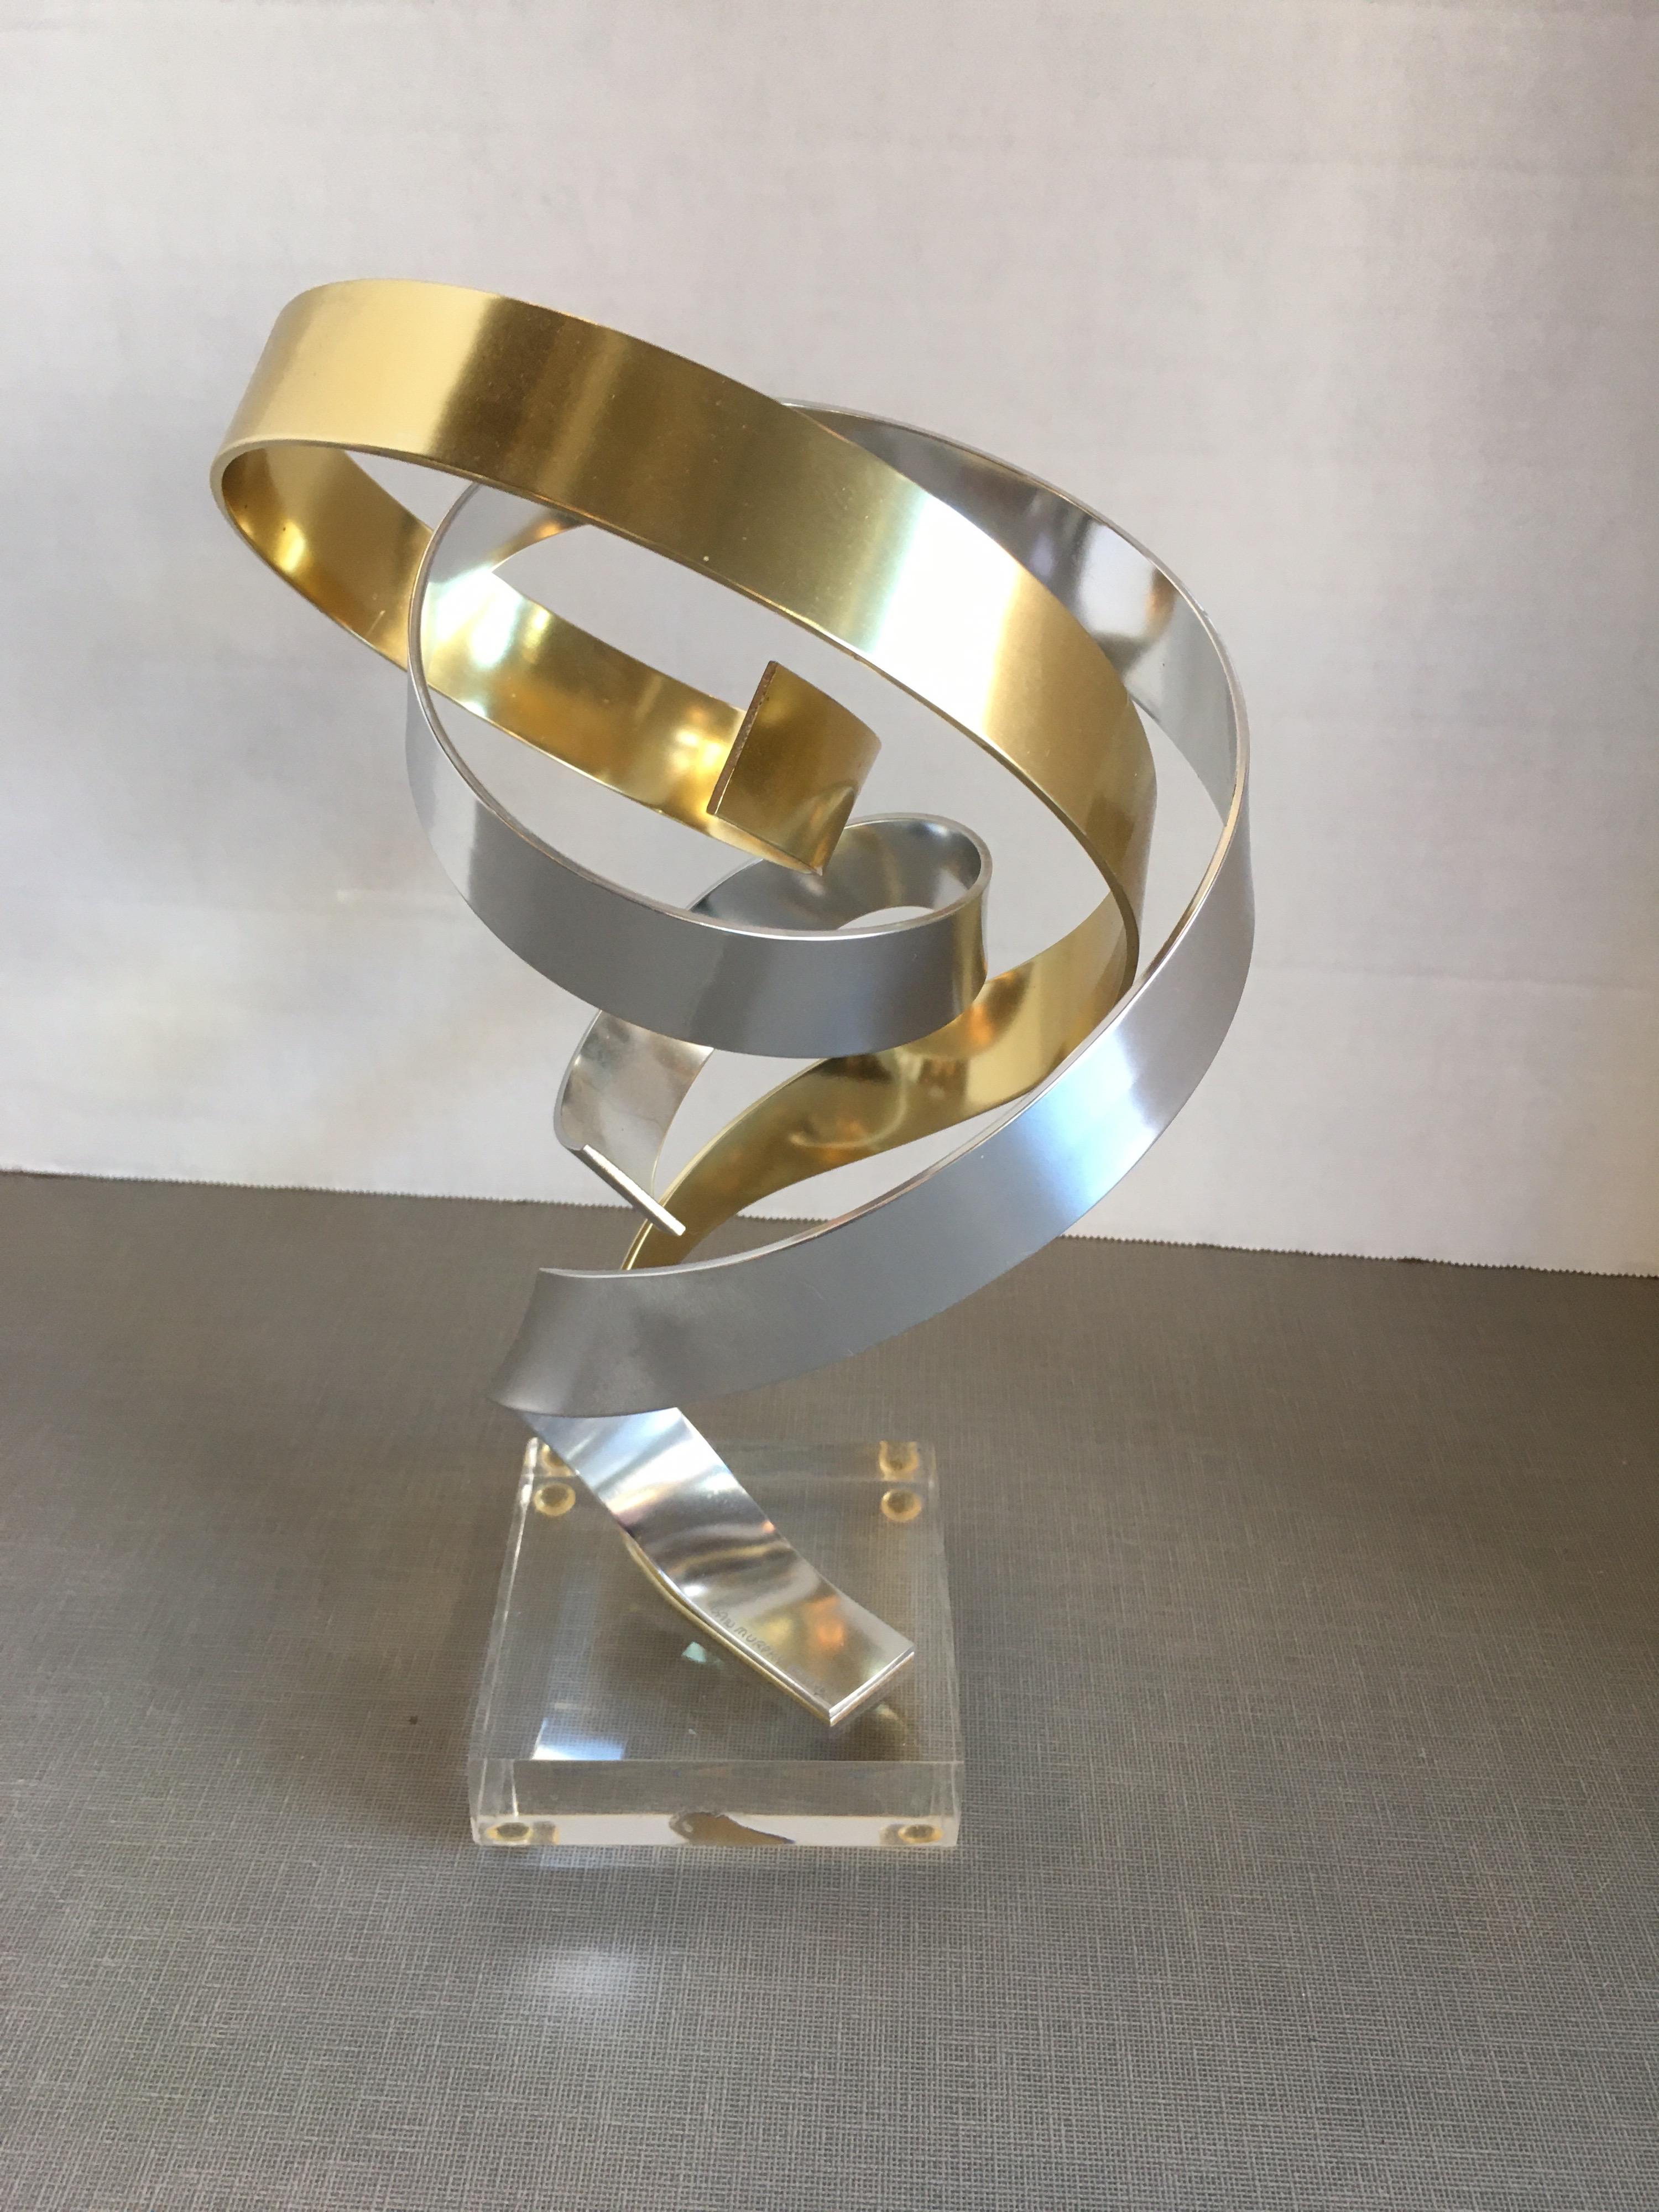 Small brass and silver aluminum ribbon sculpture on a Lucite base by Dan Murphy.